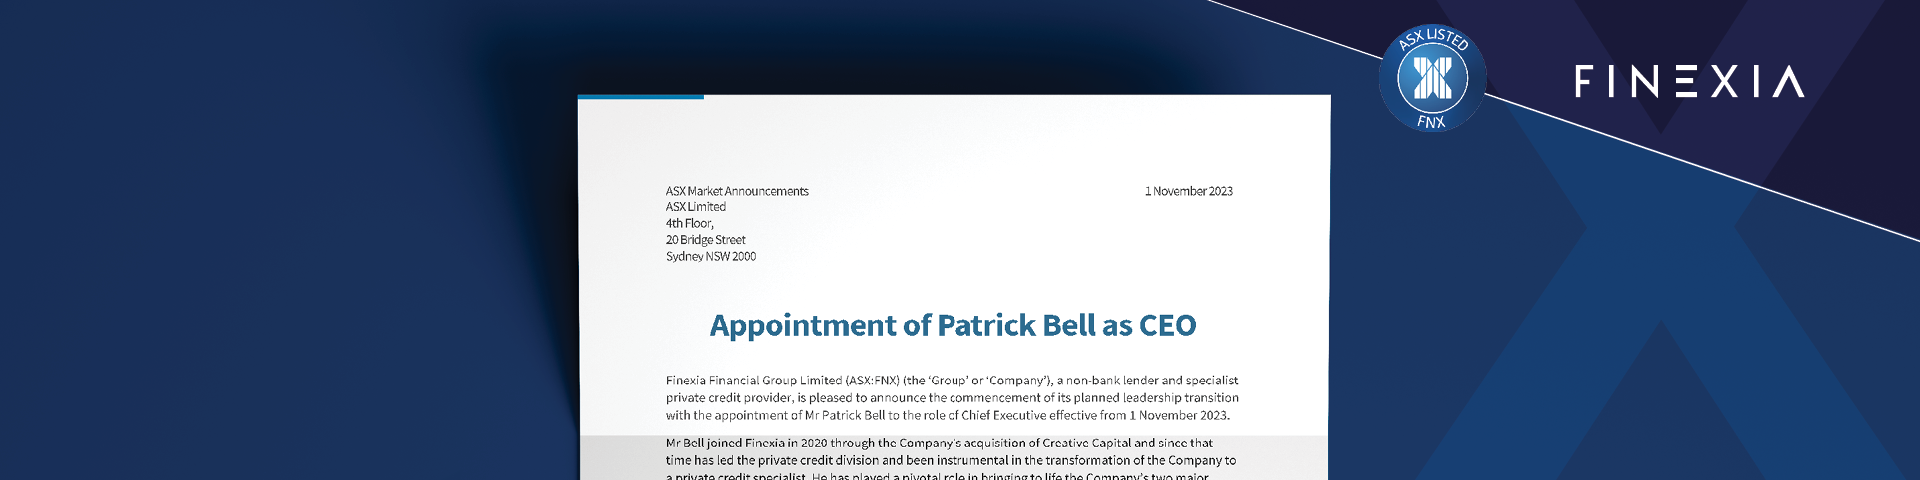 Appointment of Patrick Bell as CEO